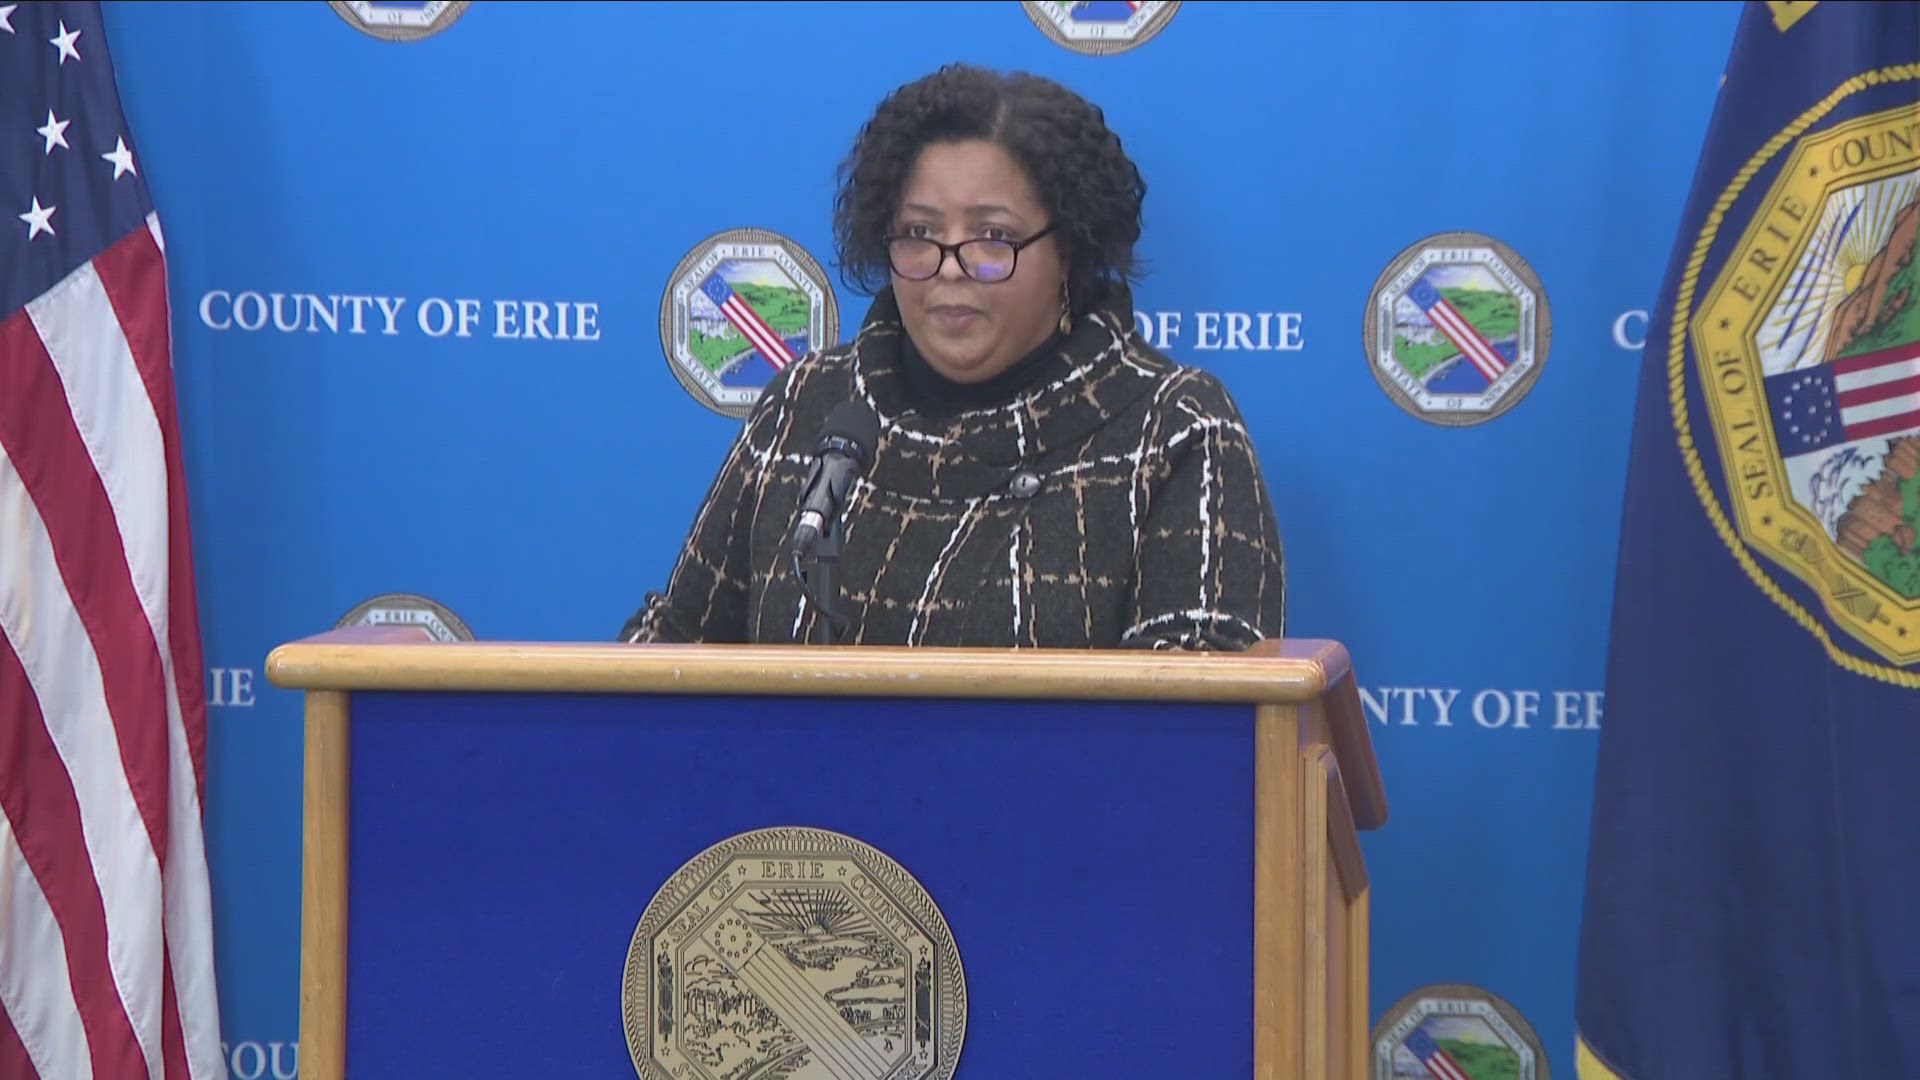 The Community Action Organization of WNY has named Marie Cannon as its new leader. Cannon most recently served as commissioner of social services for Erie County.